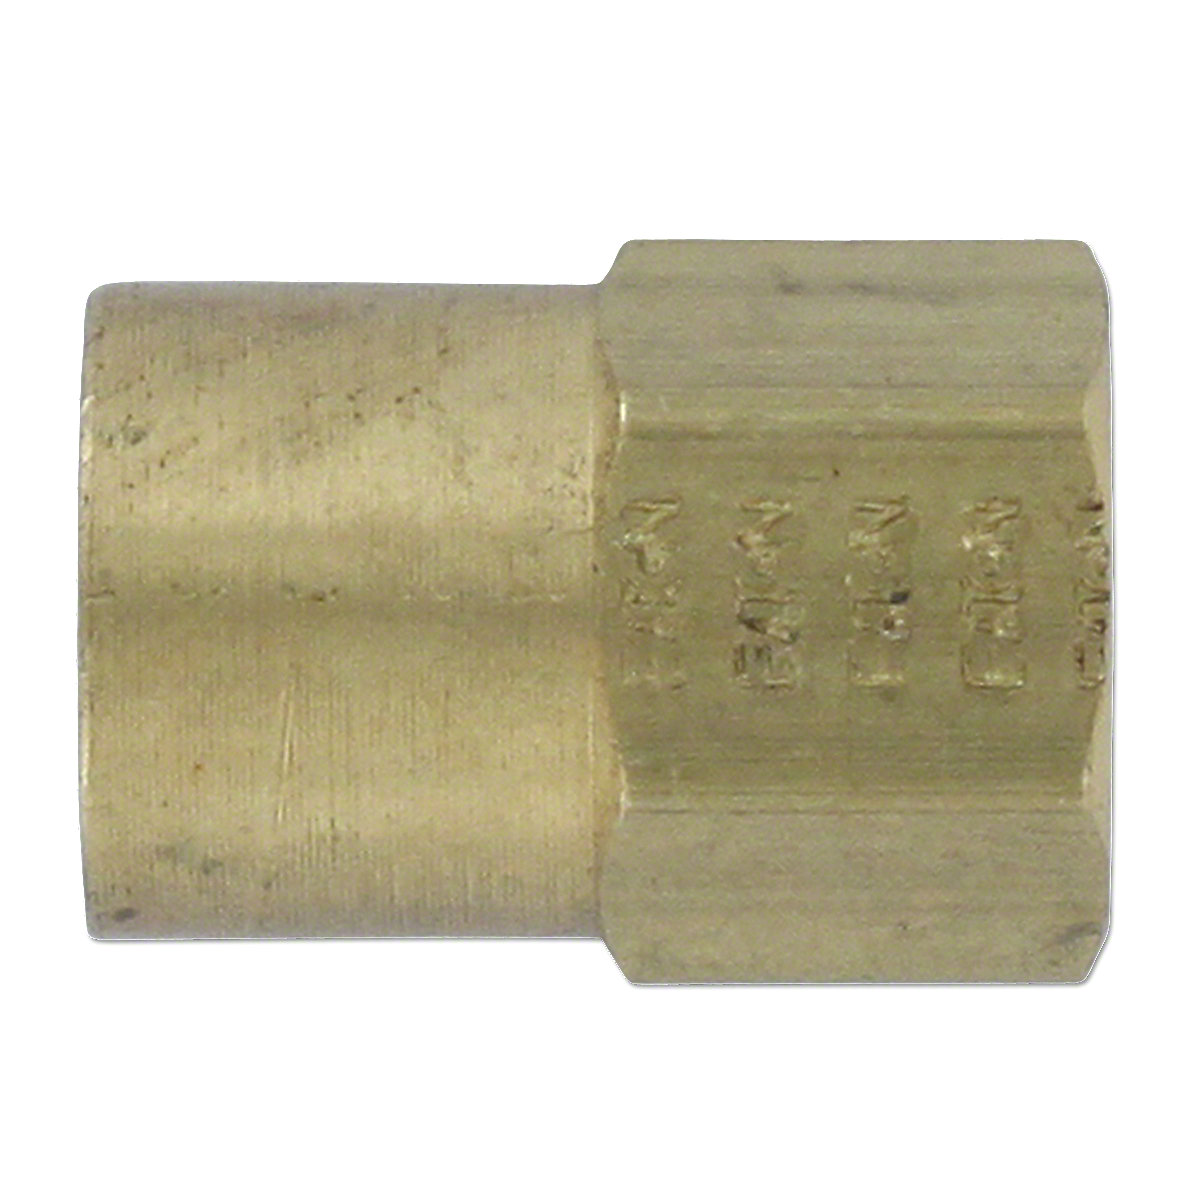 Oil Gauge Adapter Fitting, 1/8